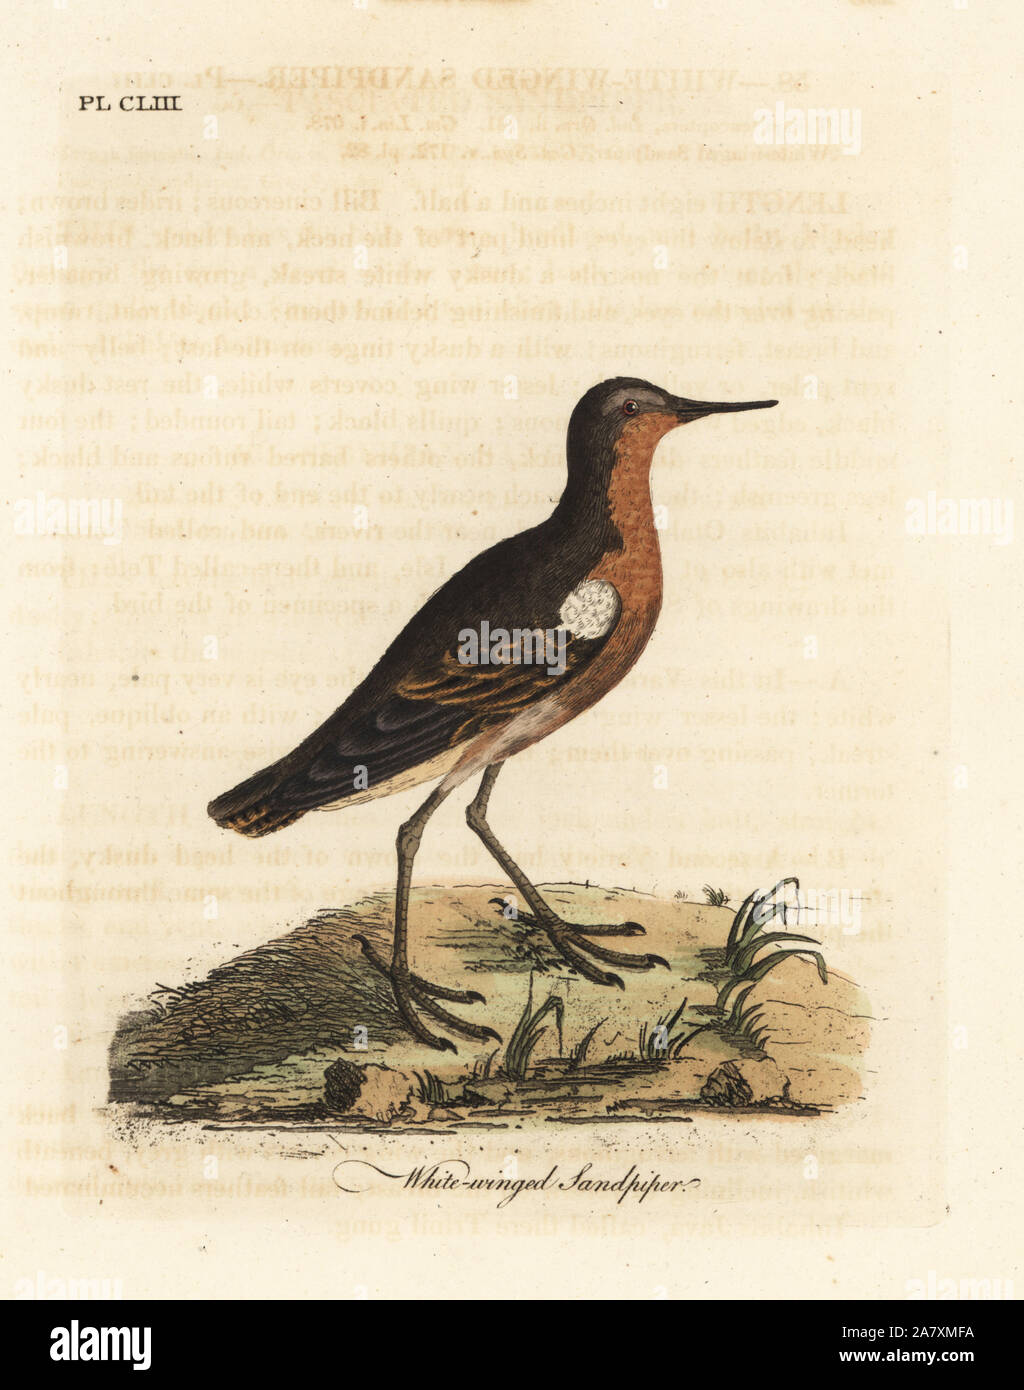 Tahitian sandpiper, Prosobonia leucoptera. Extinct. (White-winged sandpiper, Tringa leucoptera.) Handcoloured copperplate drawn and engraved by John Latham from his own A General History of Birds, Winchester, 1824. Stock Photo